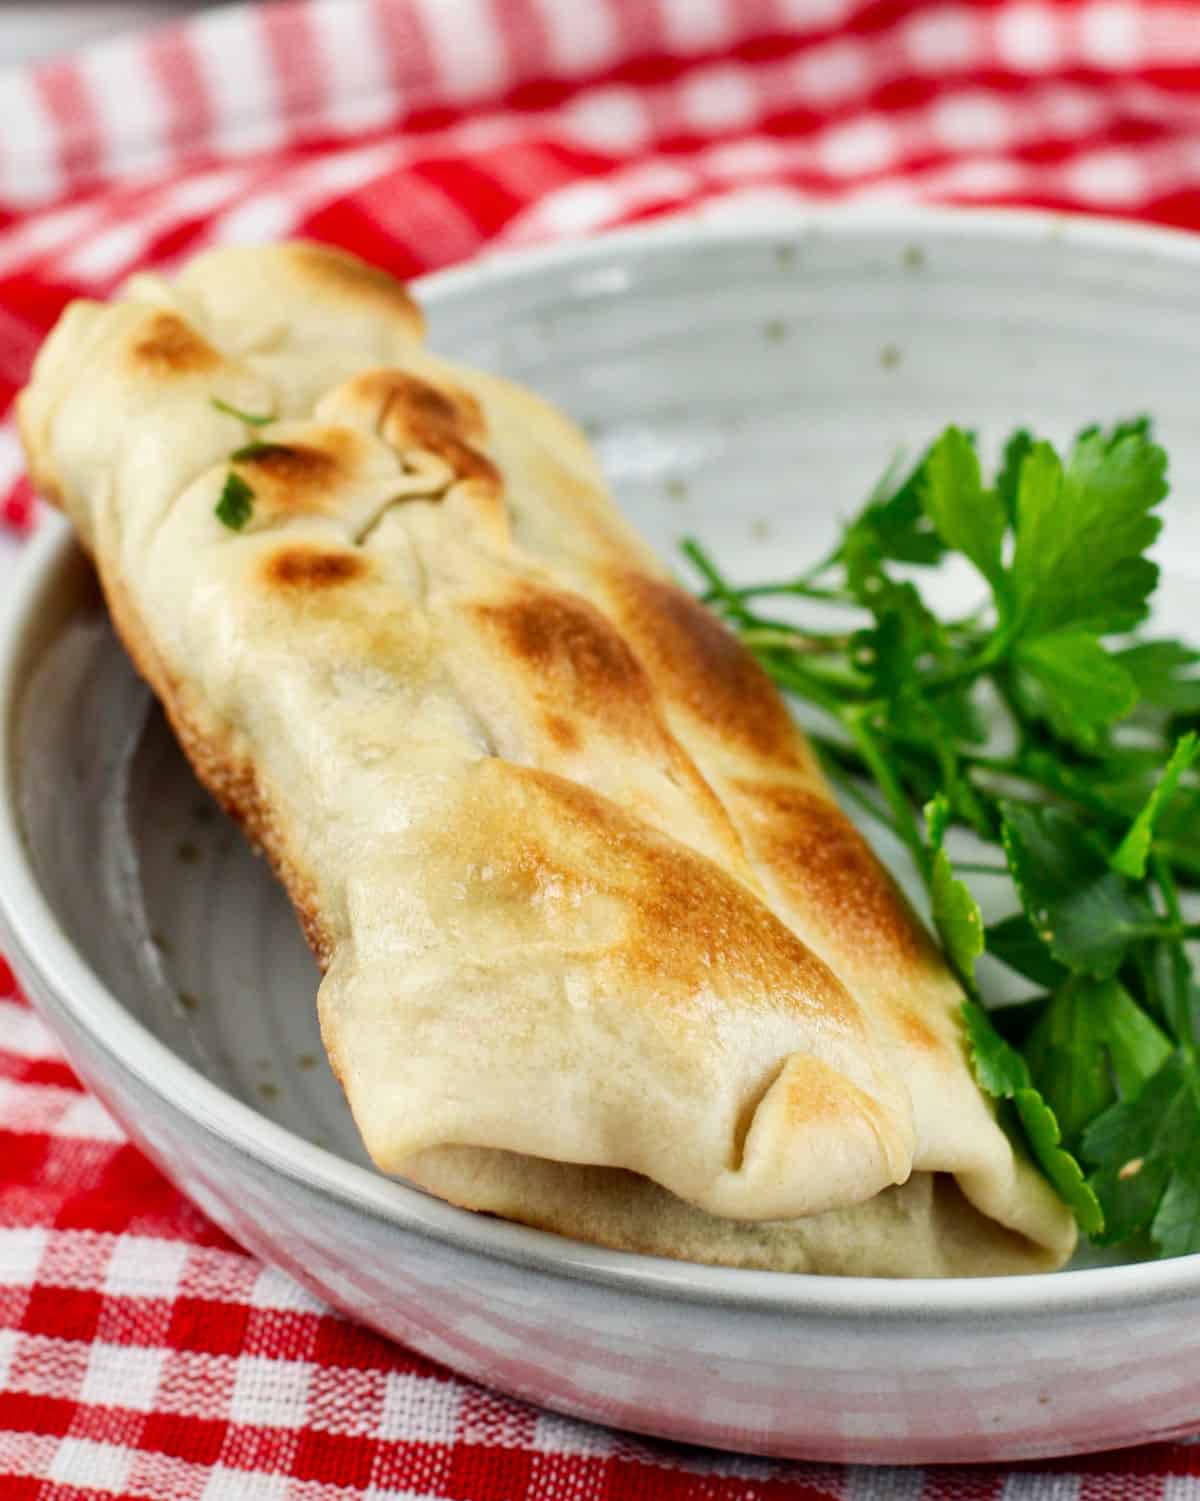 Rgaif - Moroccan Flat Bread with filling rolled up like a burrito.